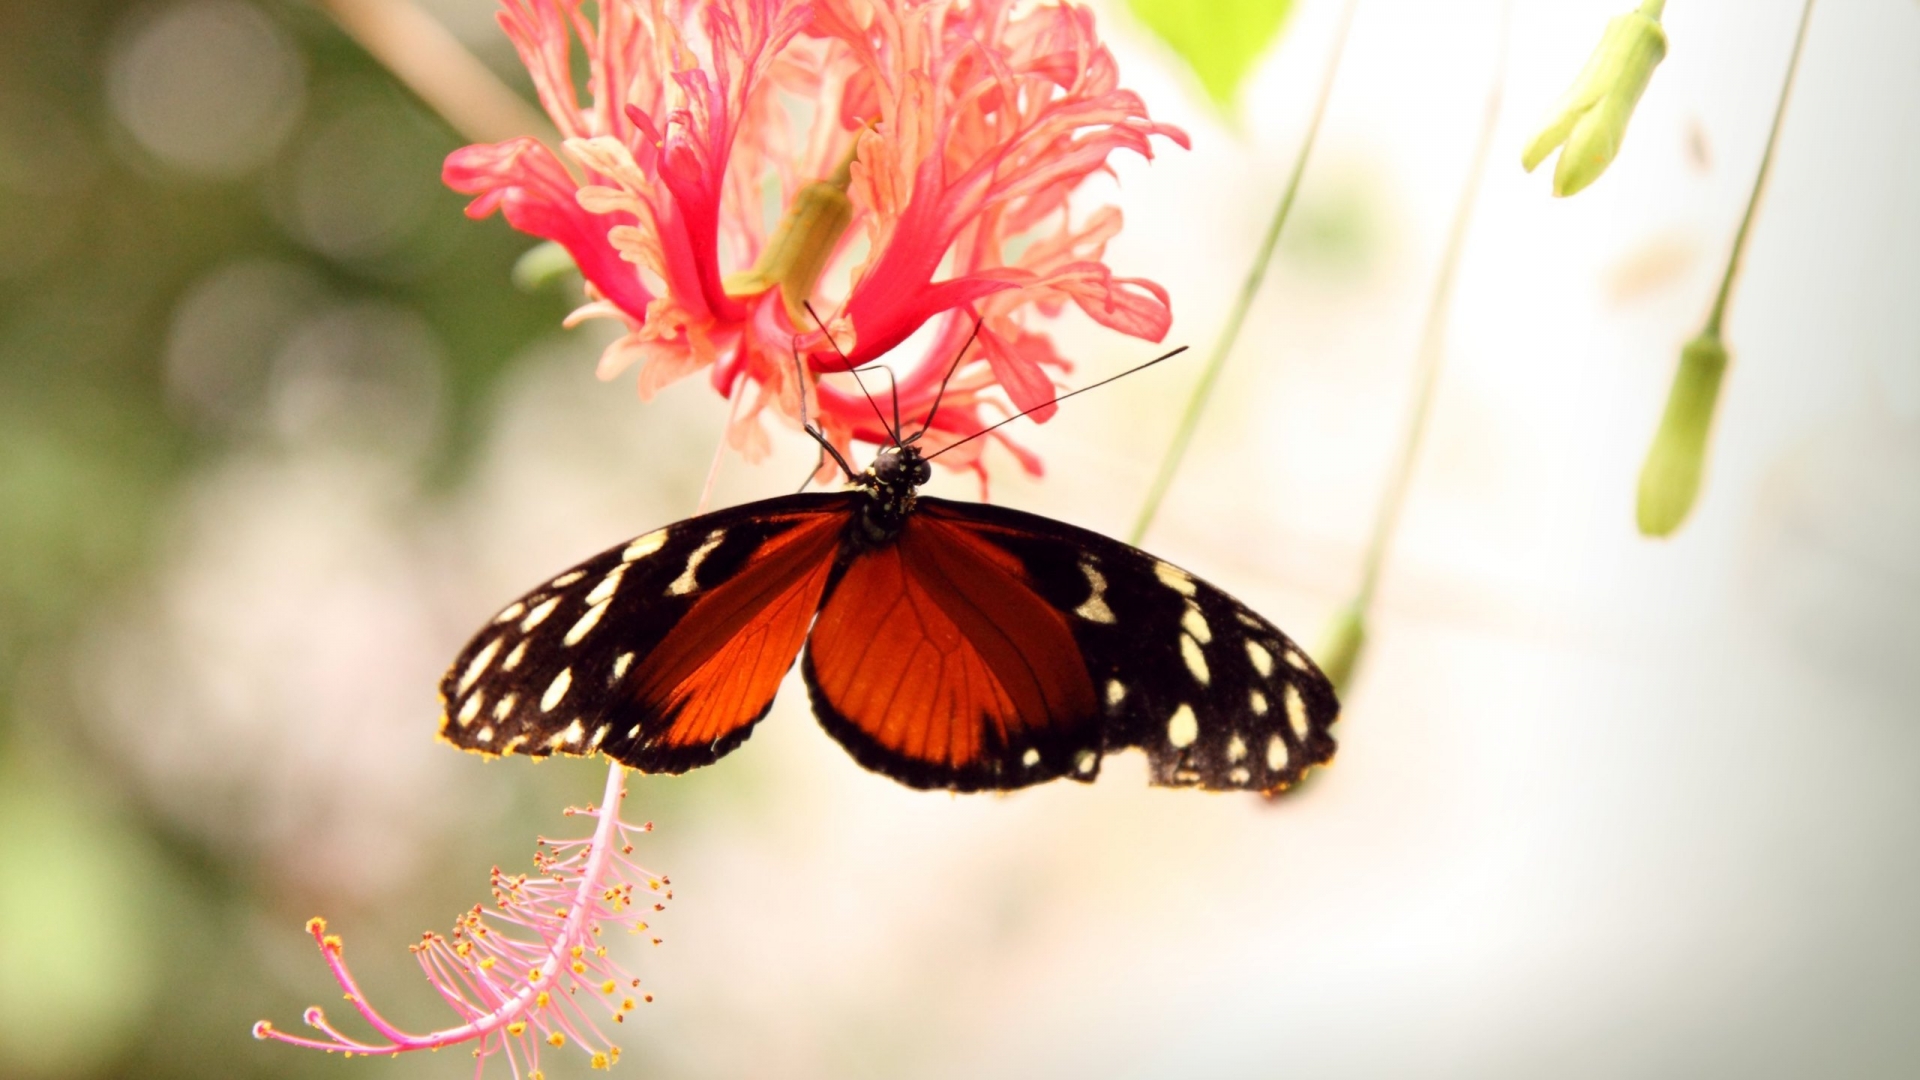 Butterfly on a Flower for 1920 x 1080 HDTV 1080p resolution